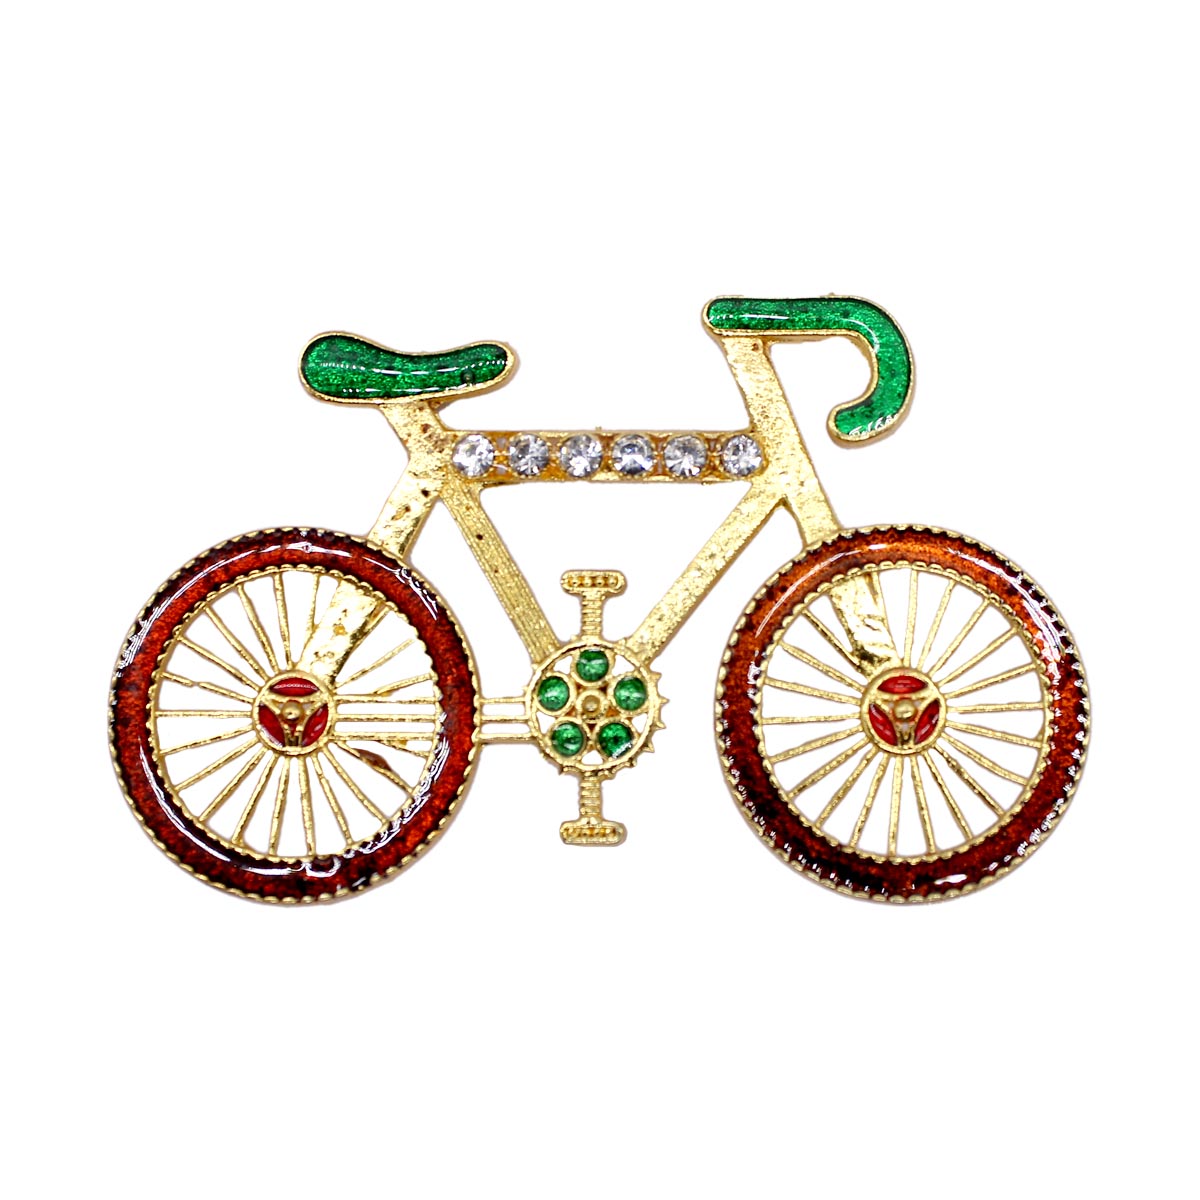 Bicycle Toy for Decoration